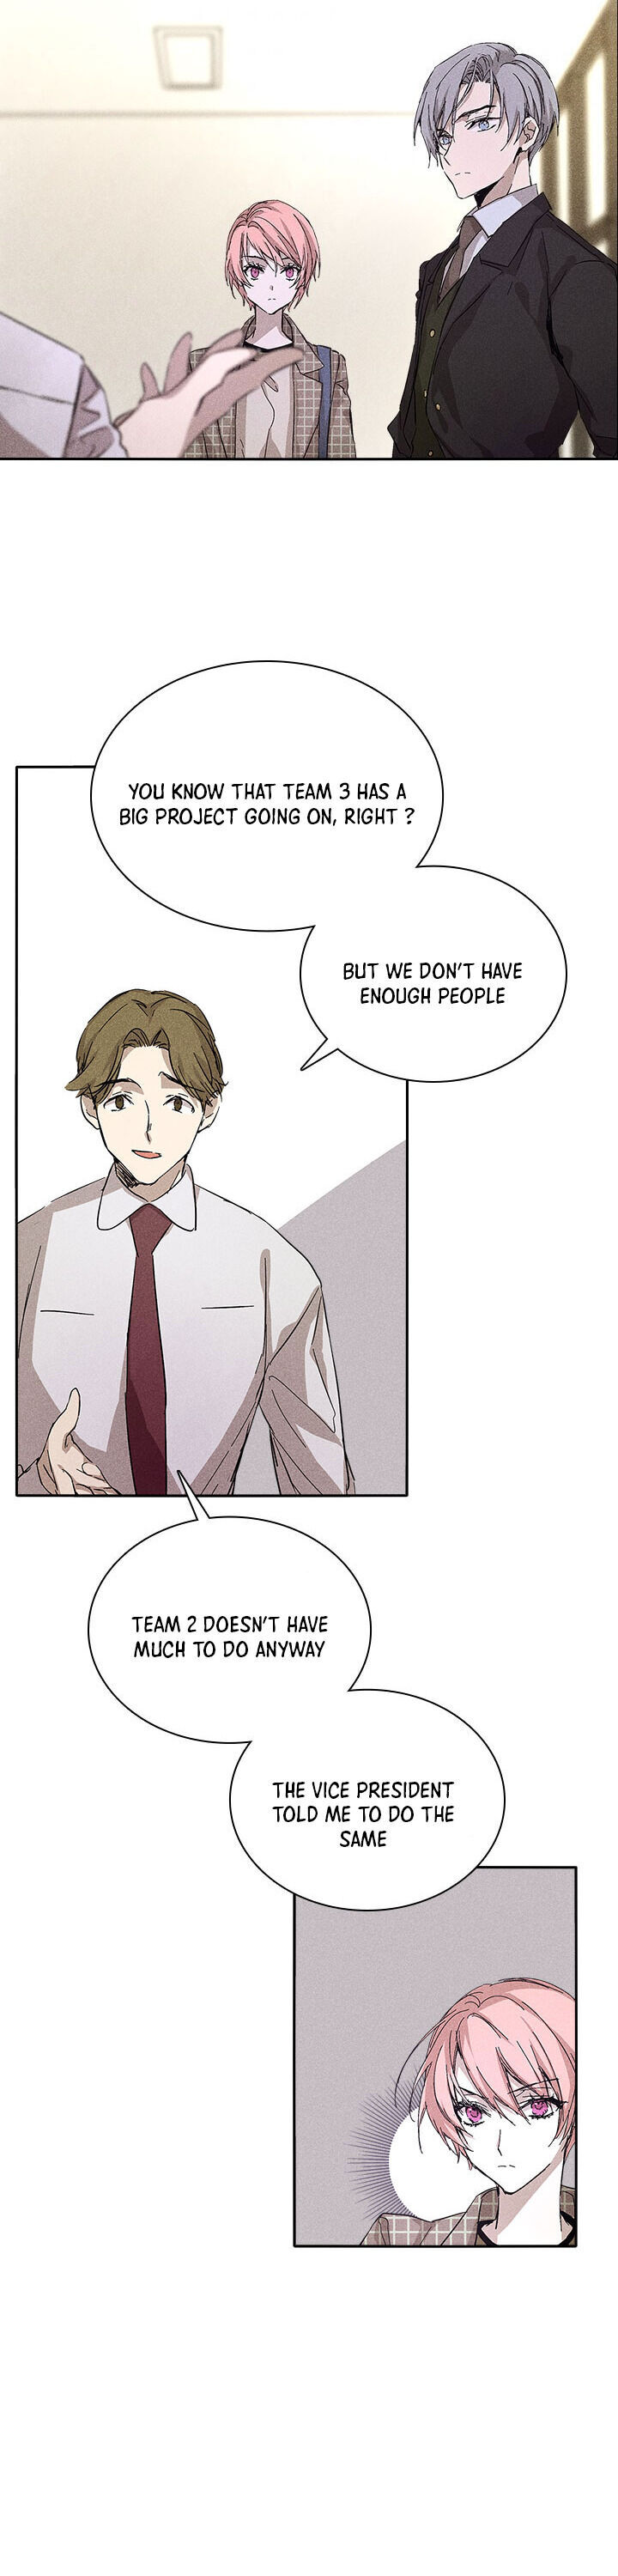 In a passionate relationship Chapter 7 - Page 9